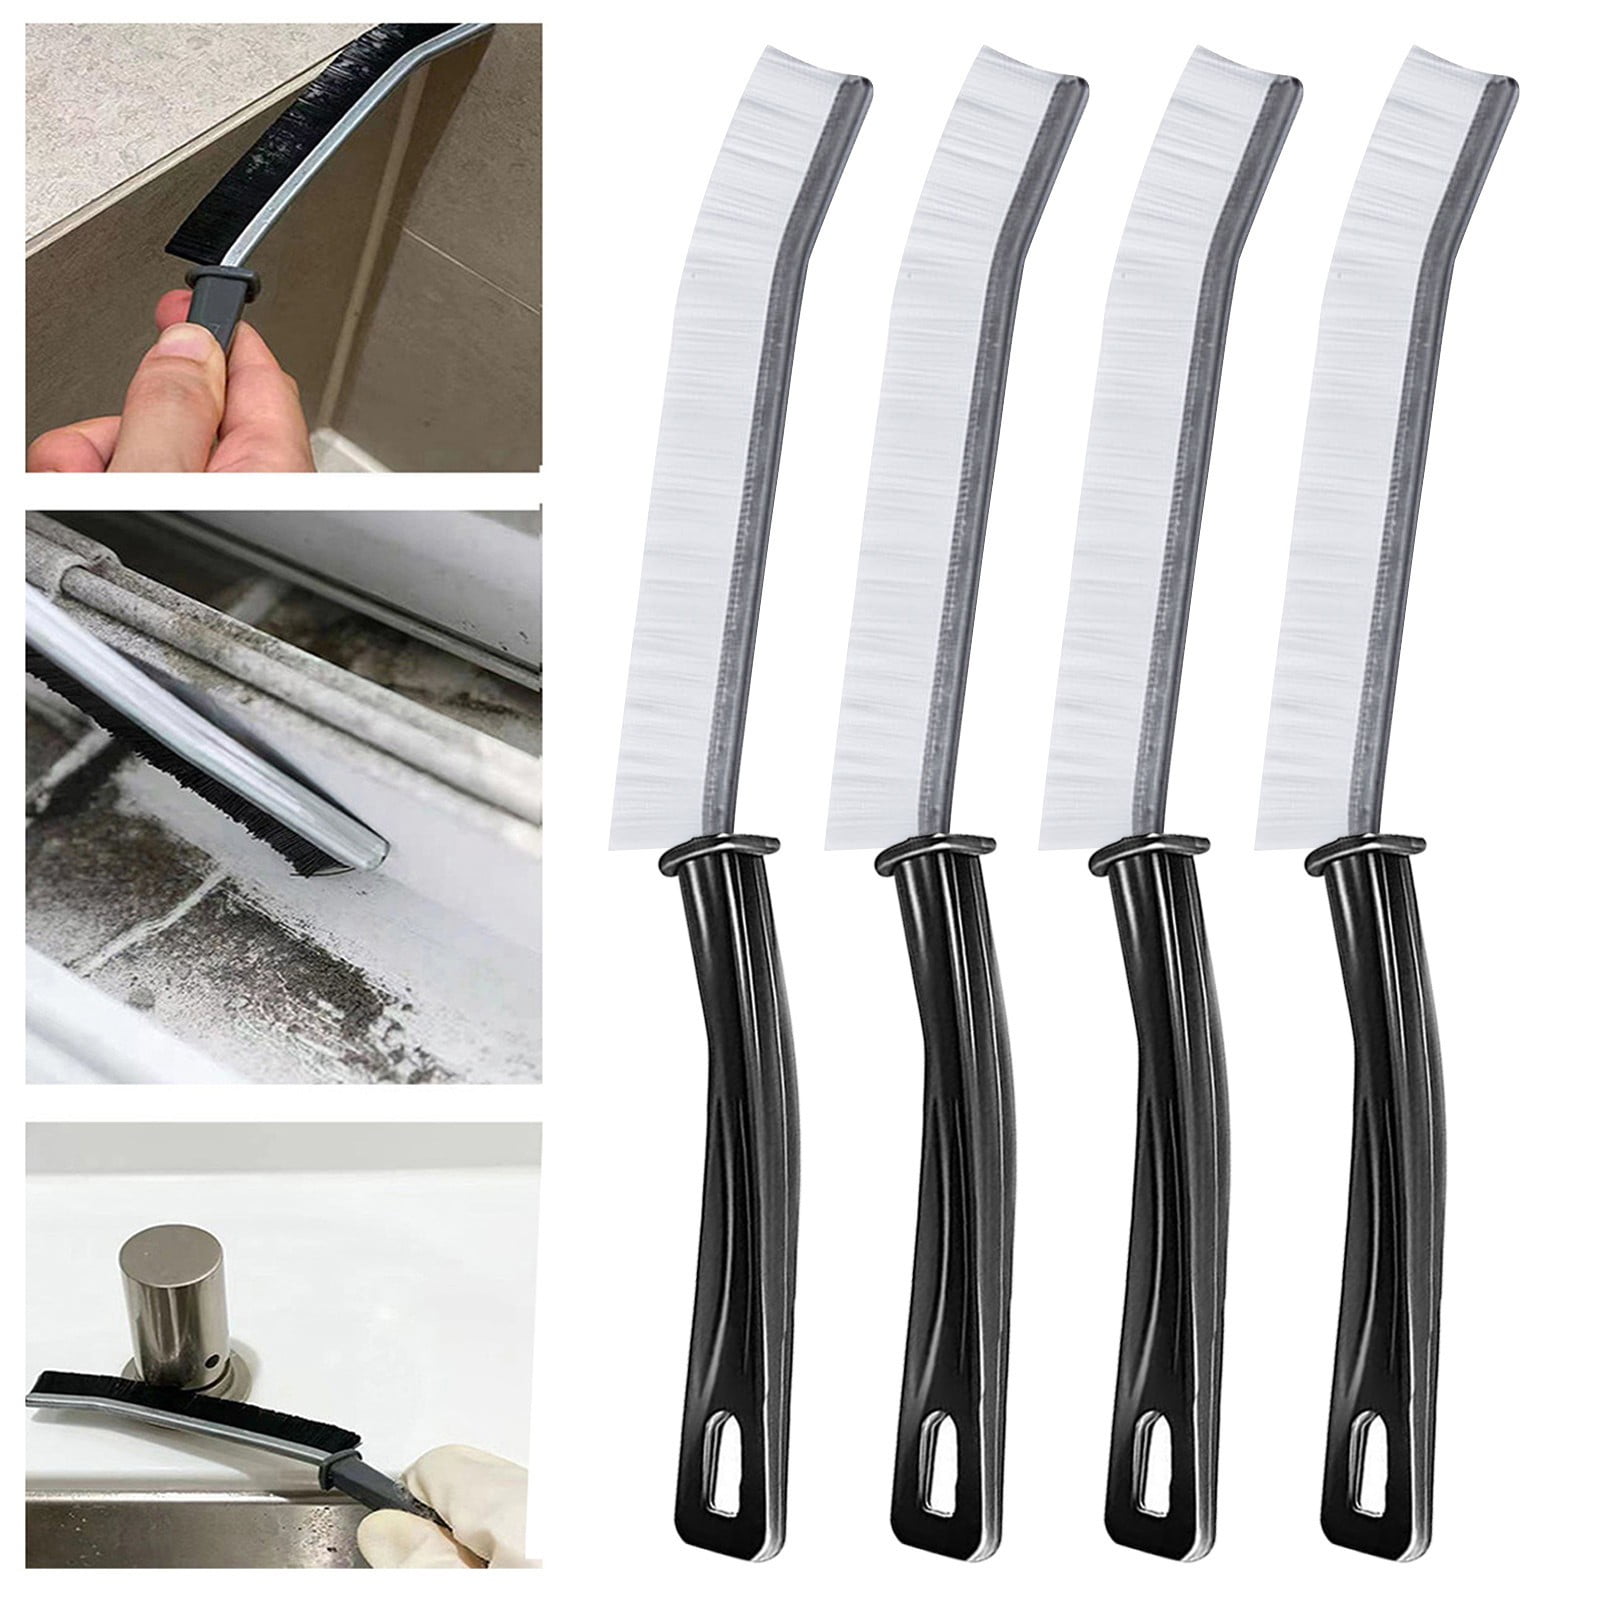 4PCS Crevice Cleaning Brush Multi-functional Handheld Groove